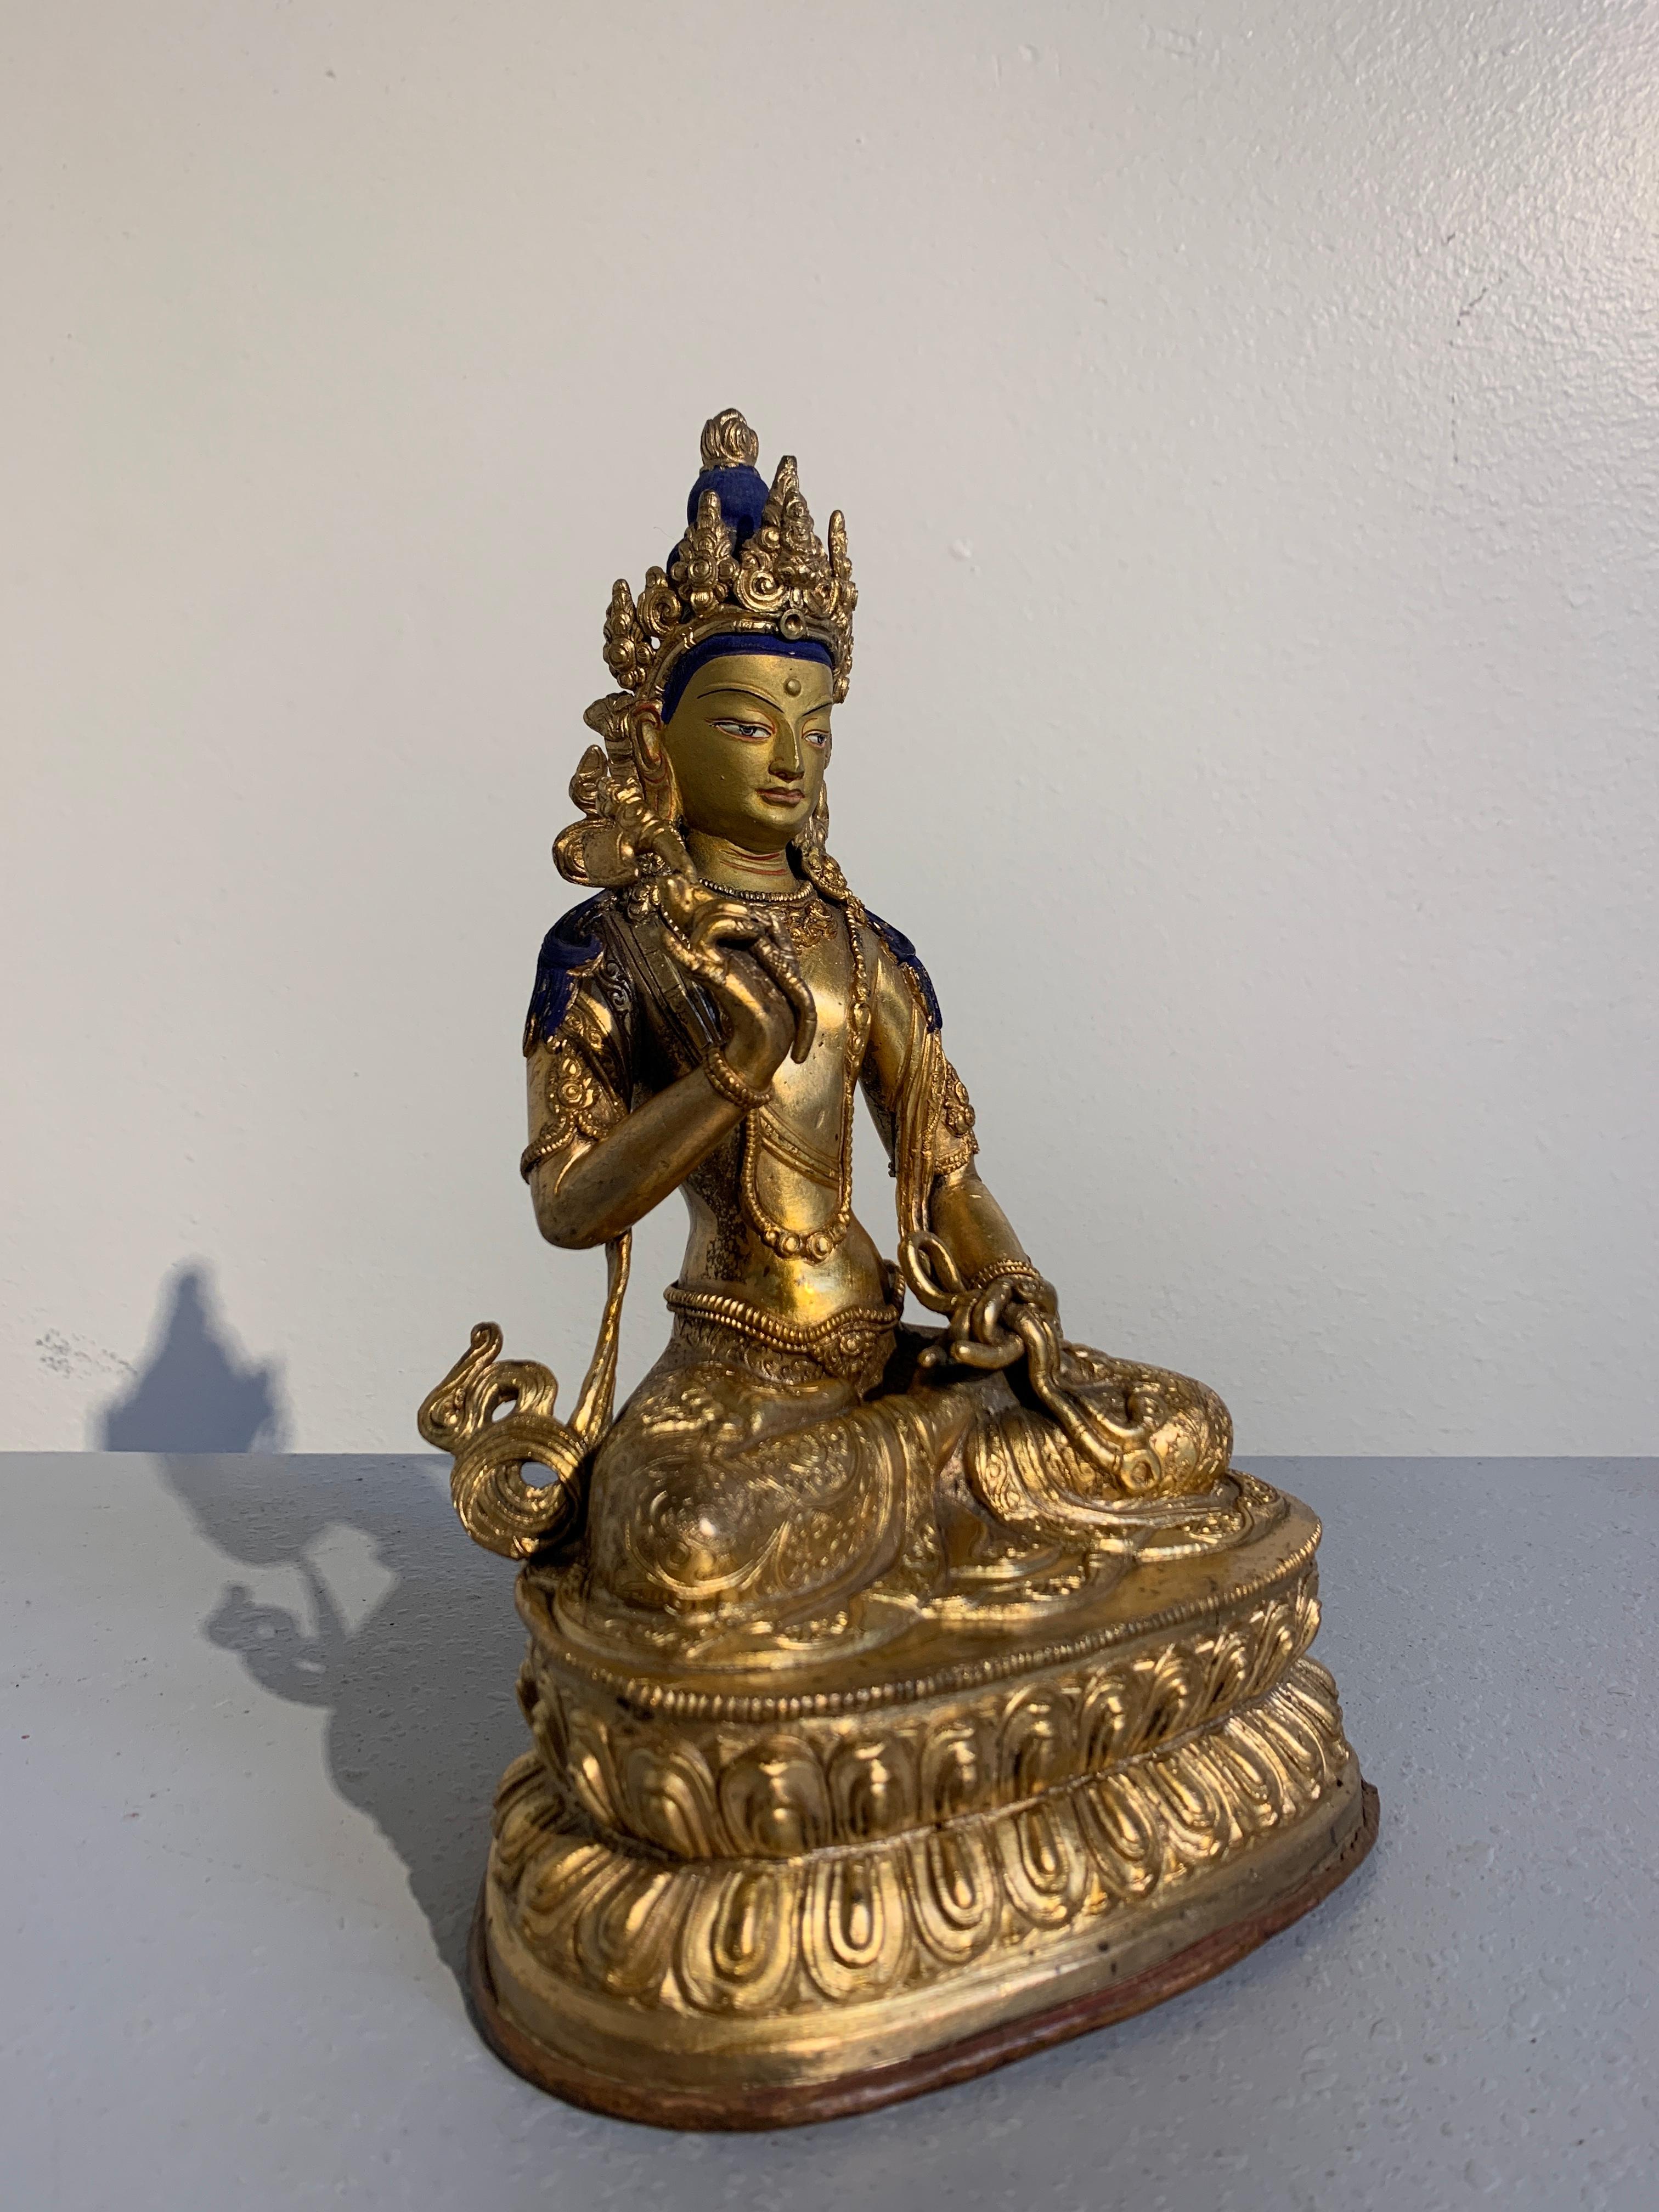 A beautiful and unusual gilt bronze figure of a Bodhisattva, possibly Amoghapasha, Nepal, early to mid-20th century, circa 1930s or 1940s.

The regal figure possibly depicting the bodhisattva Amoghapasha, the Unfailing Lasso. The enlightened being